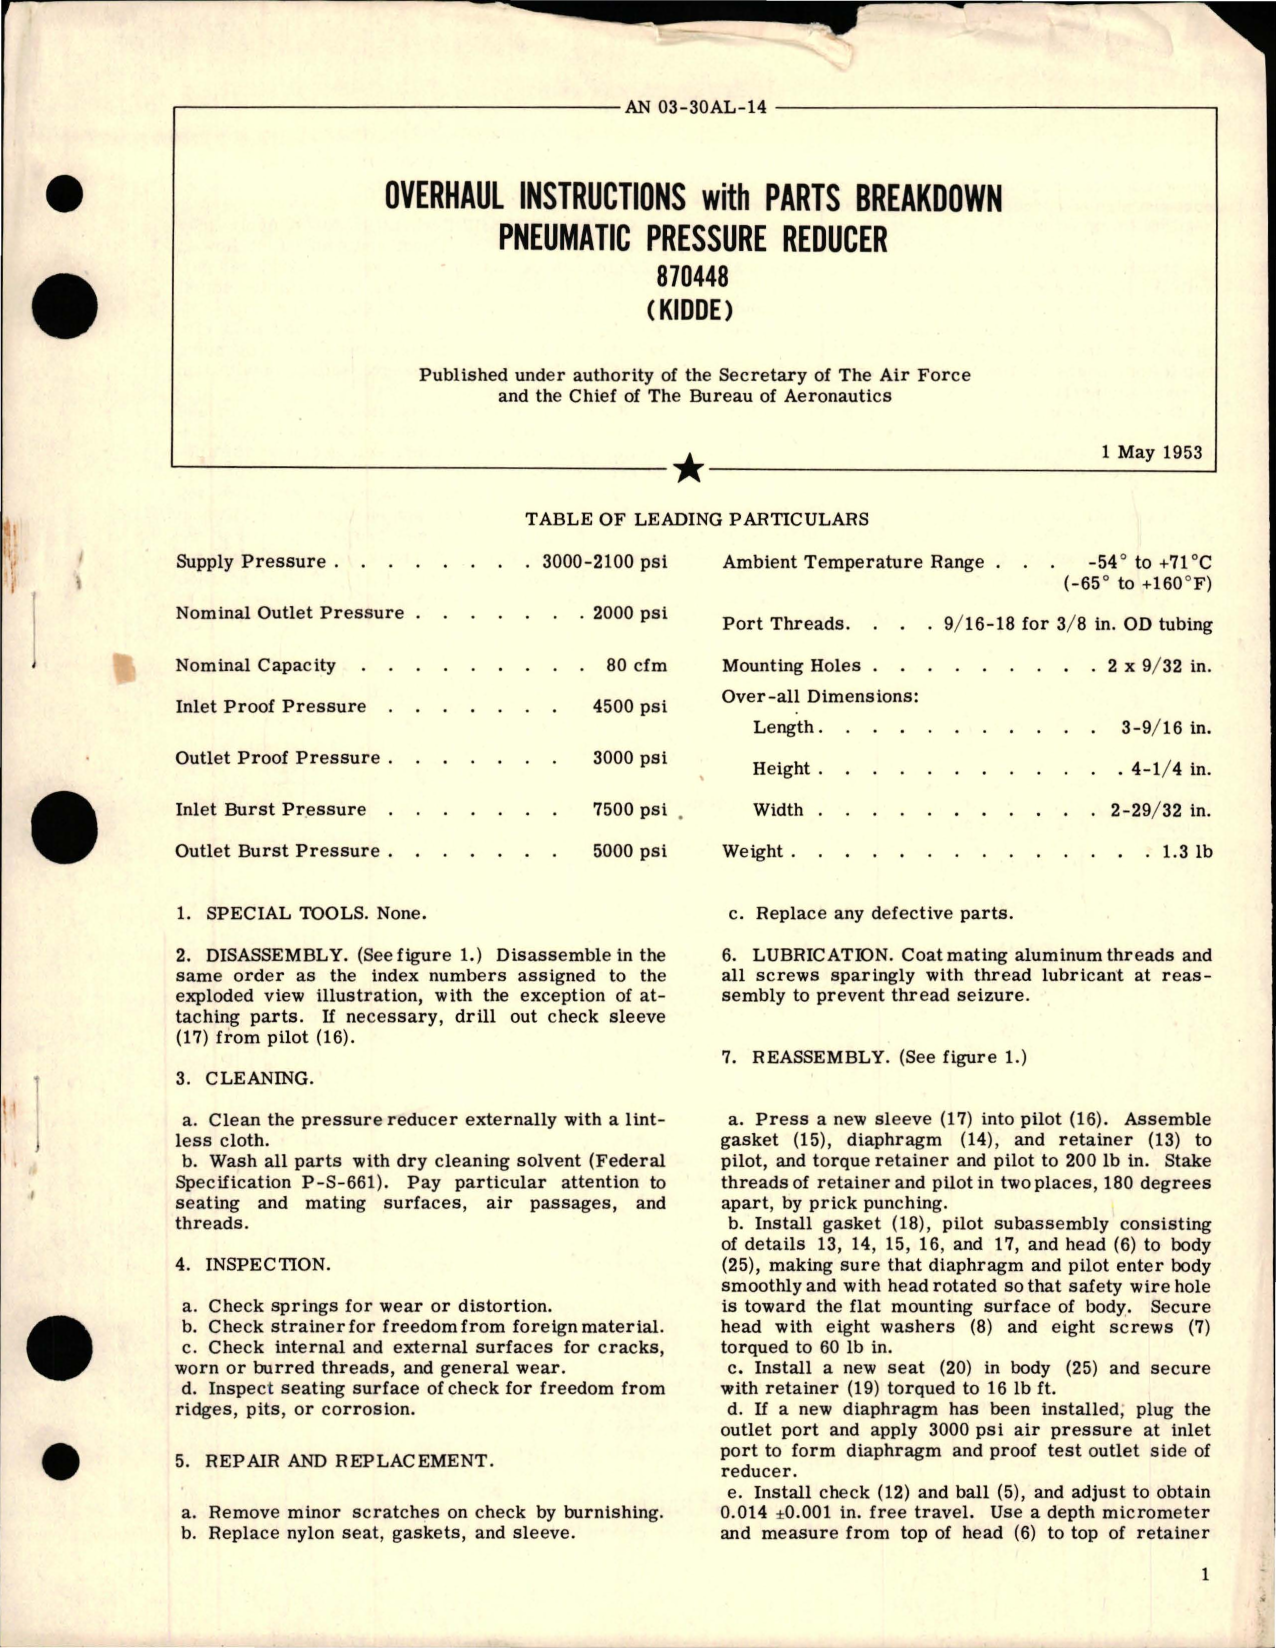 Sample page 1 from AirCorps Library document: Overhaul Instructions with Parts Breakdown for Pneumatic Pressure Reducer - 870448 